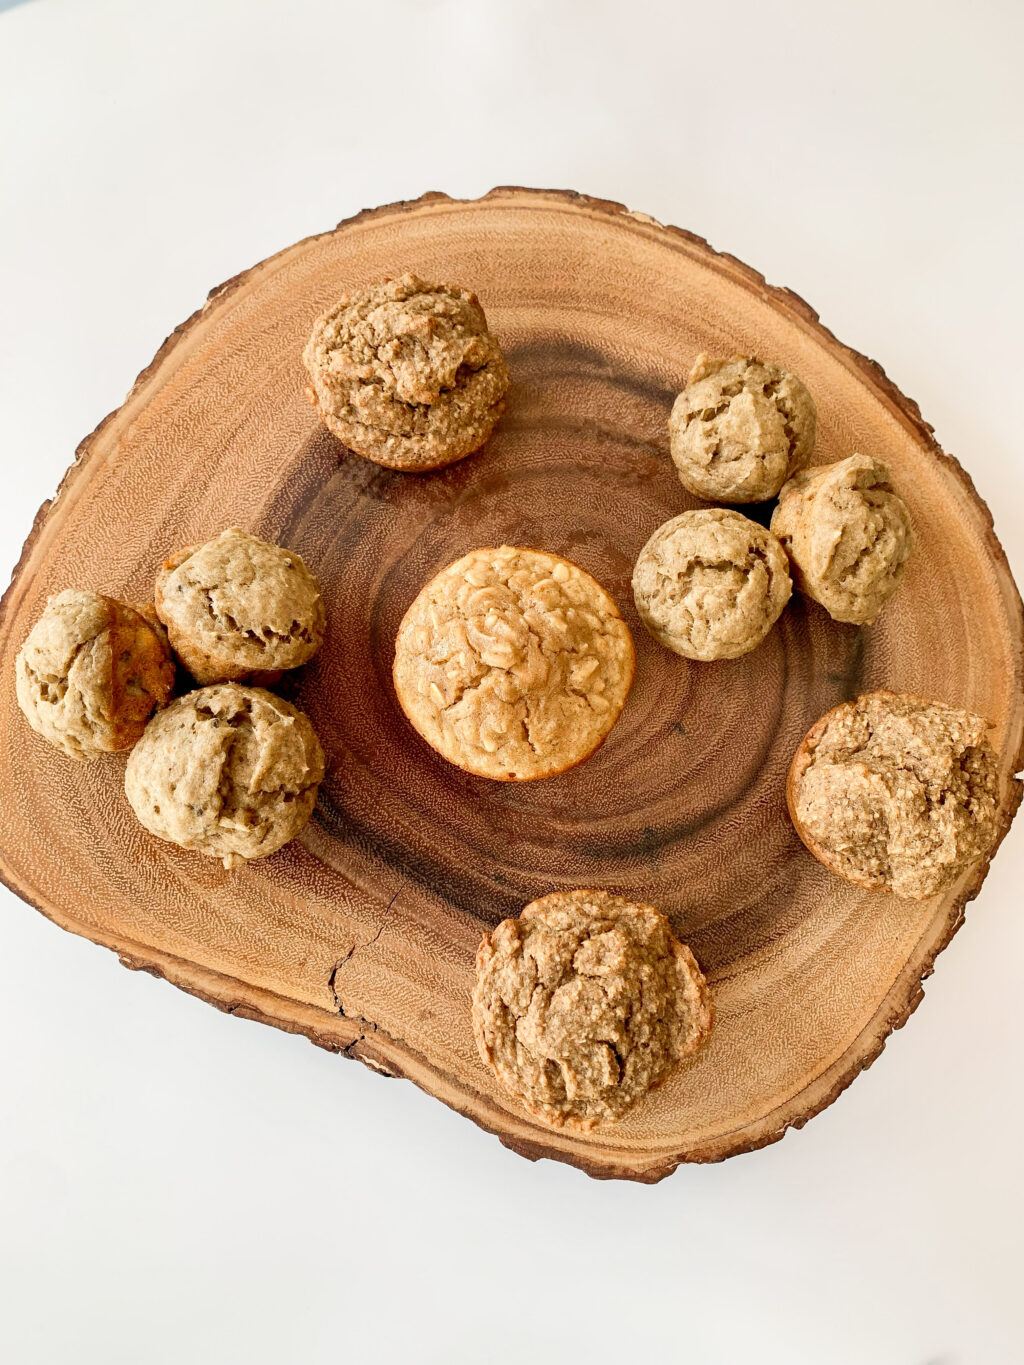 top down view of various muffins on a wooden board